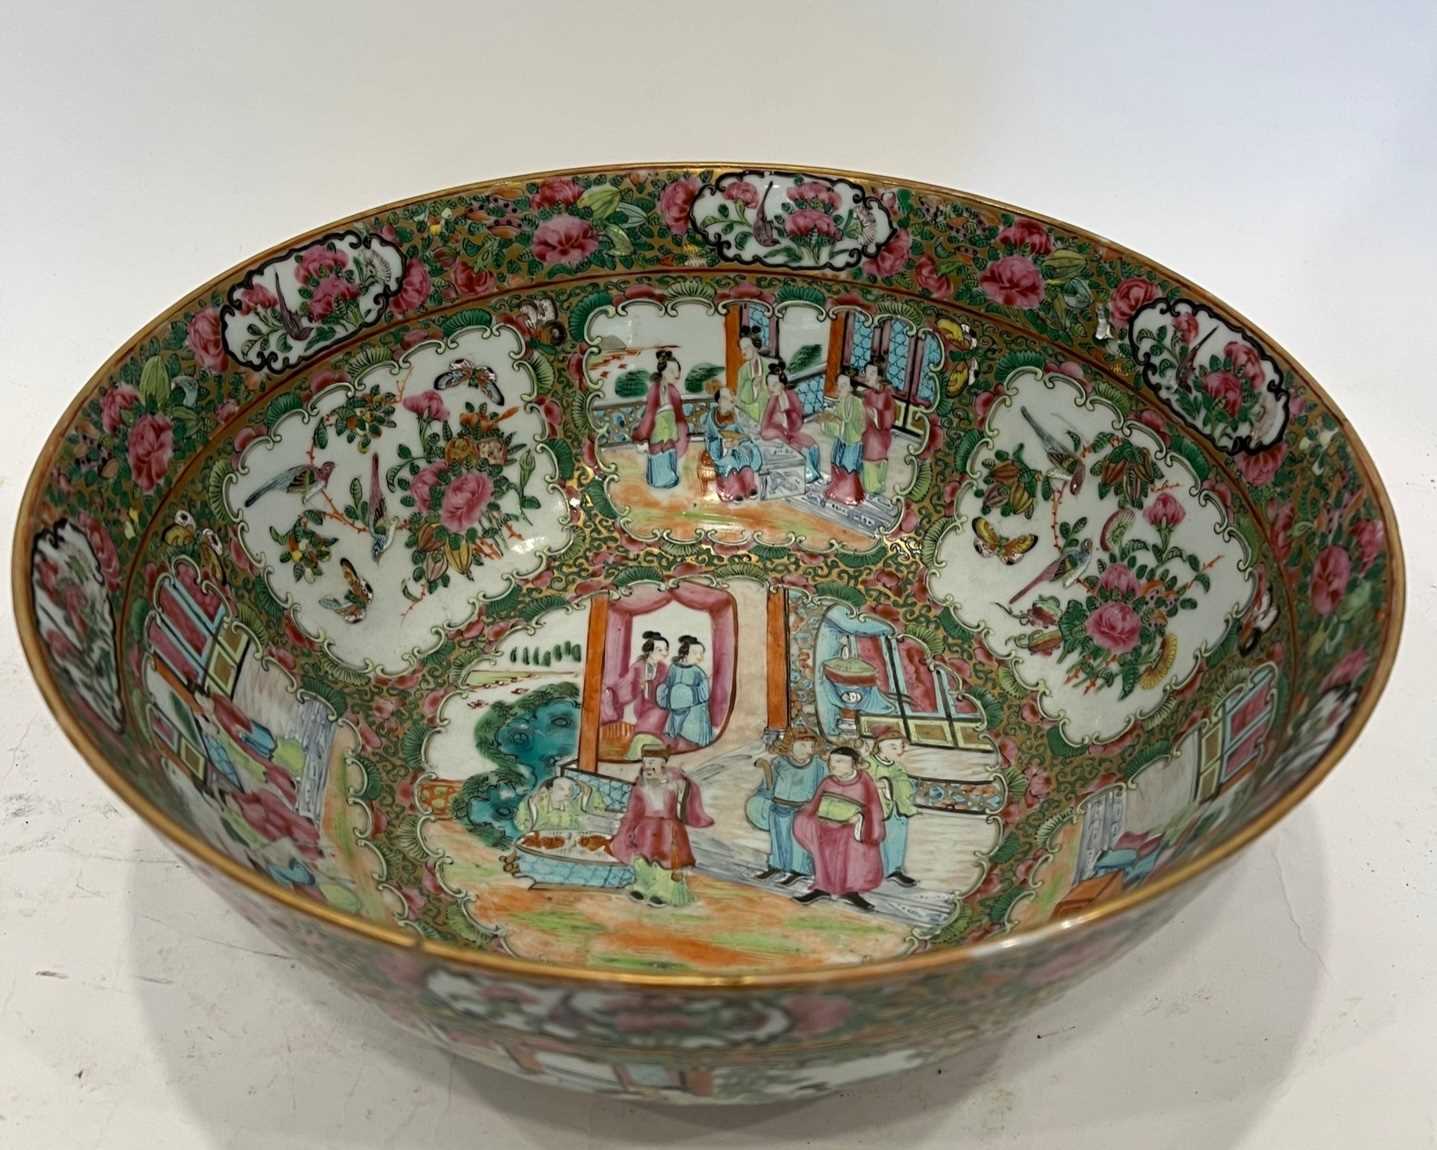 A LARGE LATE 19TH CENTURY CHINESE CANTON PORCELAIN BOWL - Image 4 of 7